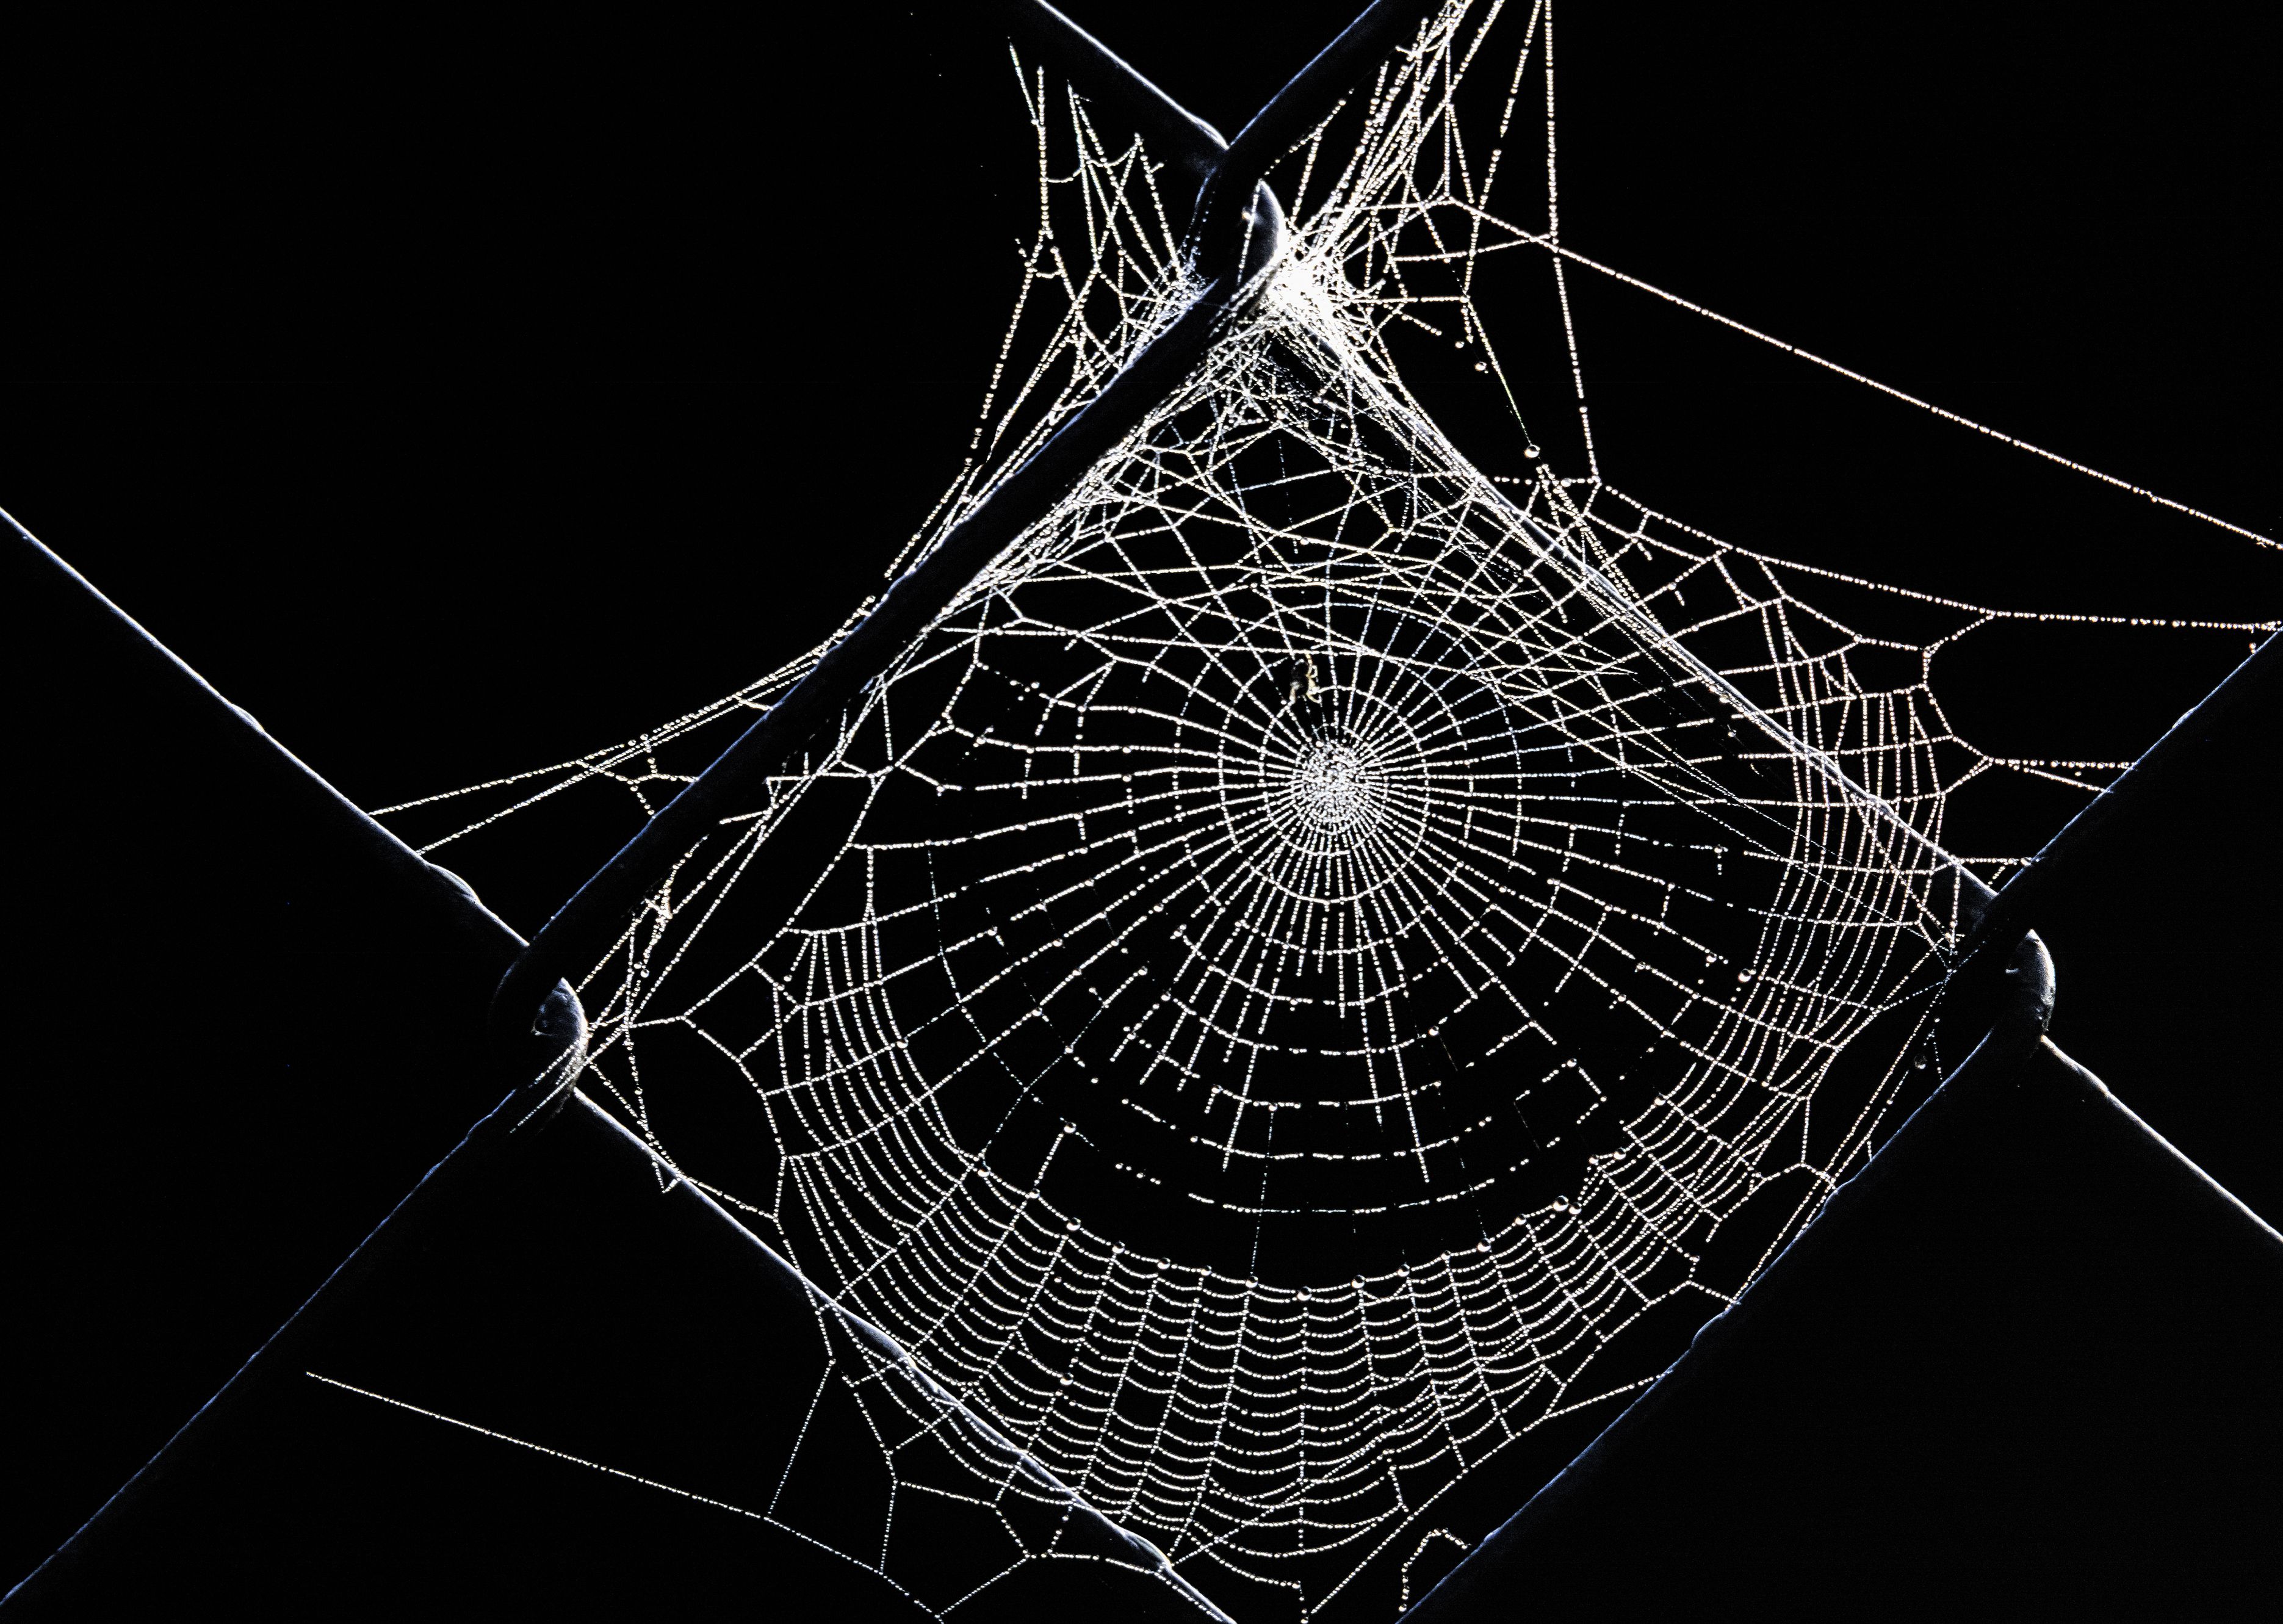 How to Make a Spider Web Drawing in Illustrator